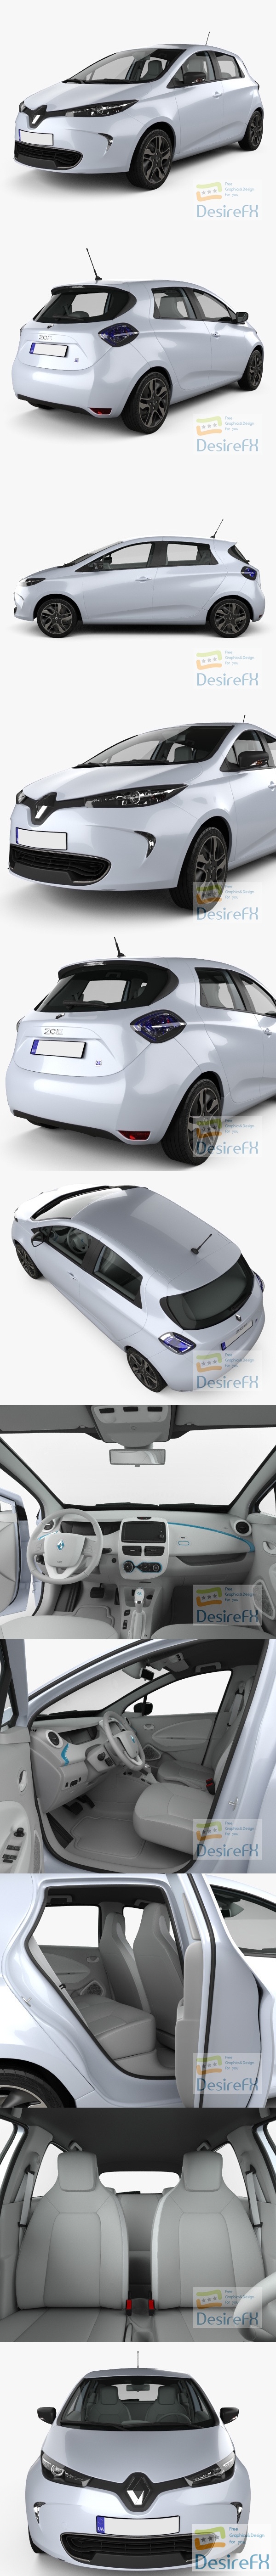 Renault ZOE with HQ interior 2013 3D Model